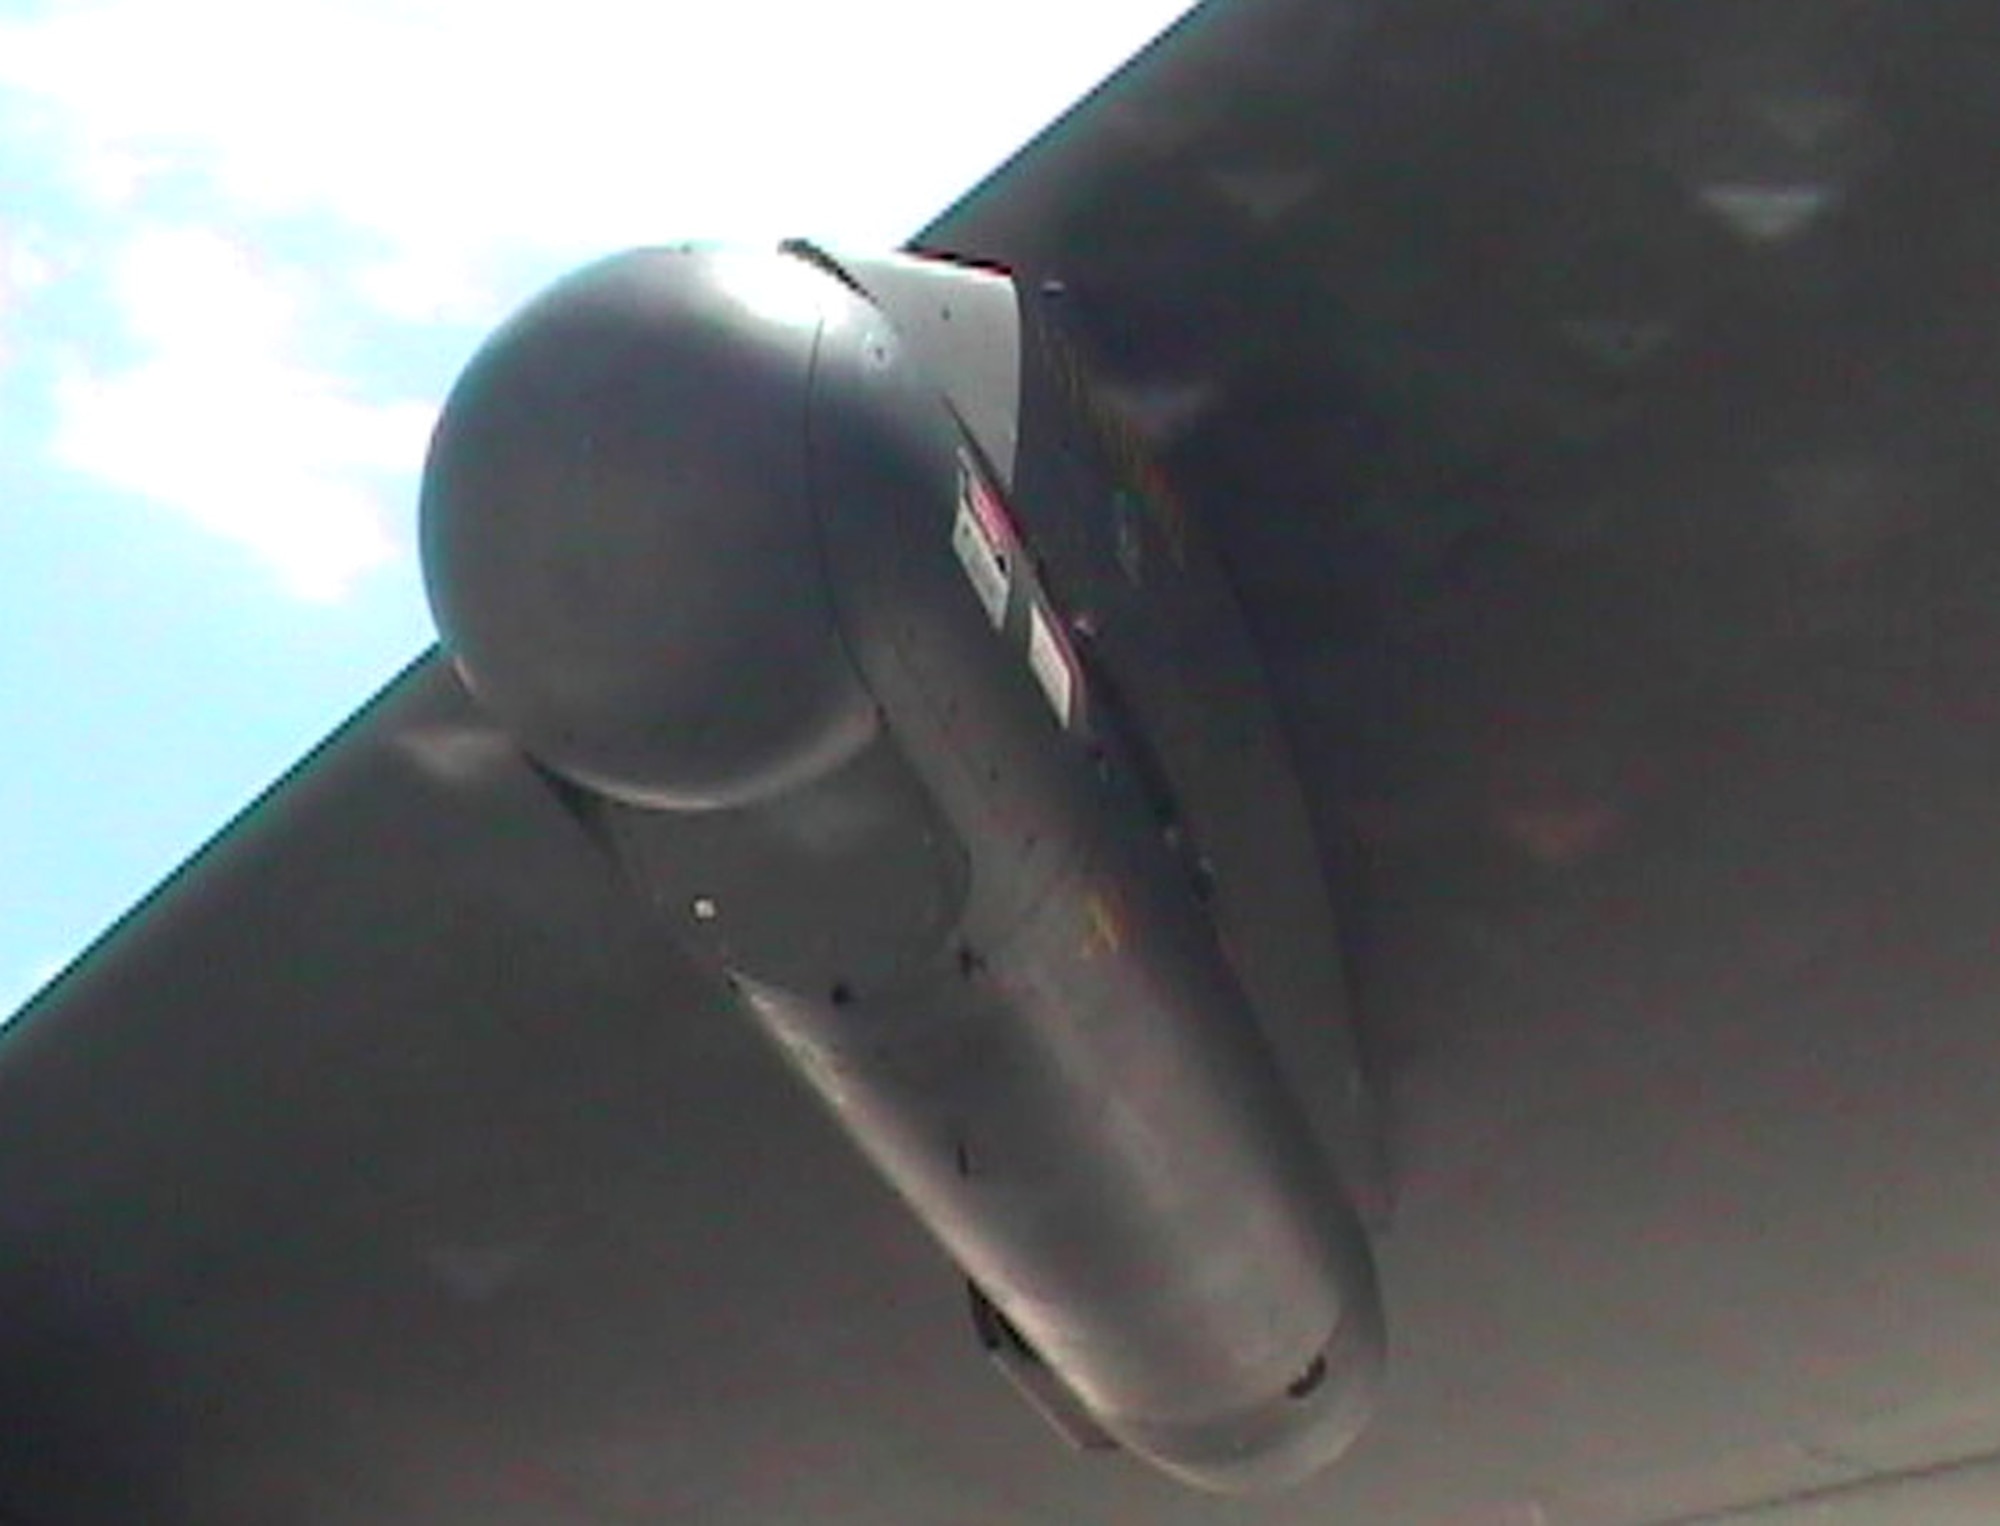 A LITENING pod sits under the wing of a B-52. The 49th Test and Evaluation Squadron's recent demonstration showed the B-52's LITENING pod's capability to capture digital imagery and upload it to communications networks. (U.S. Air Force photo)